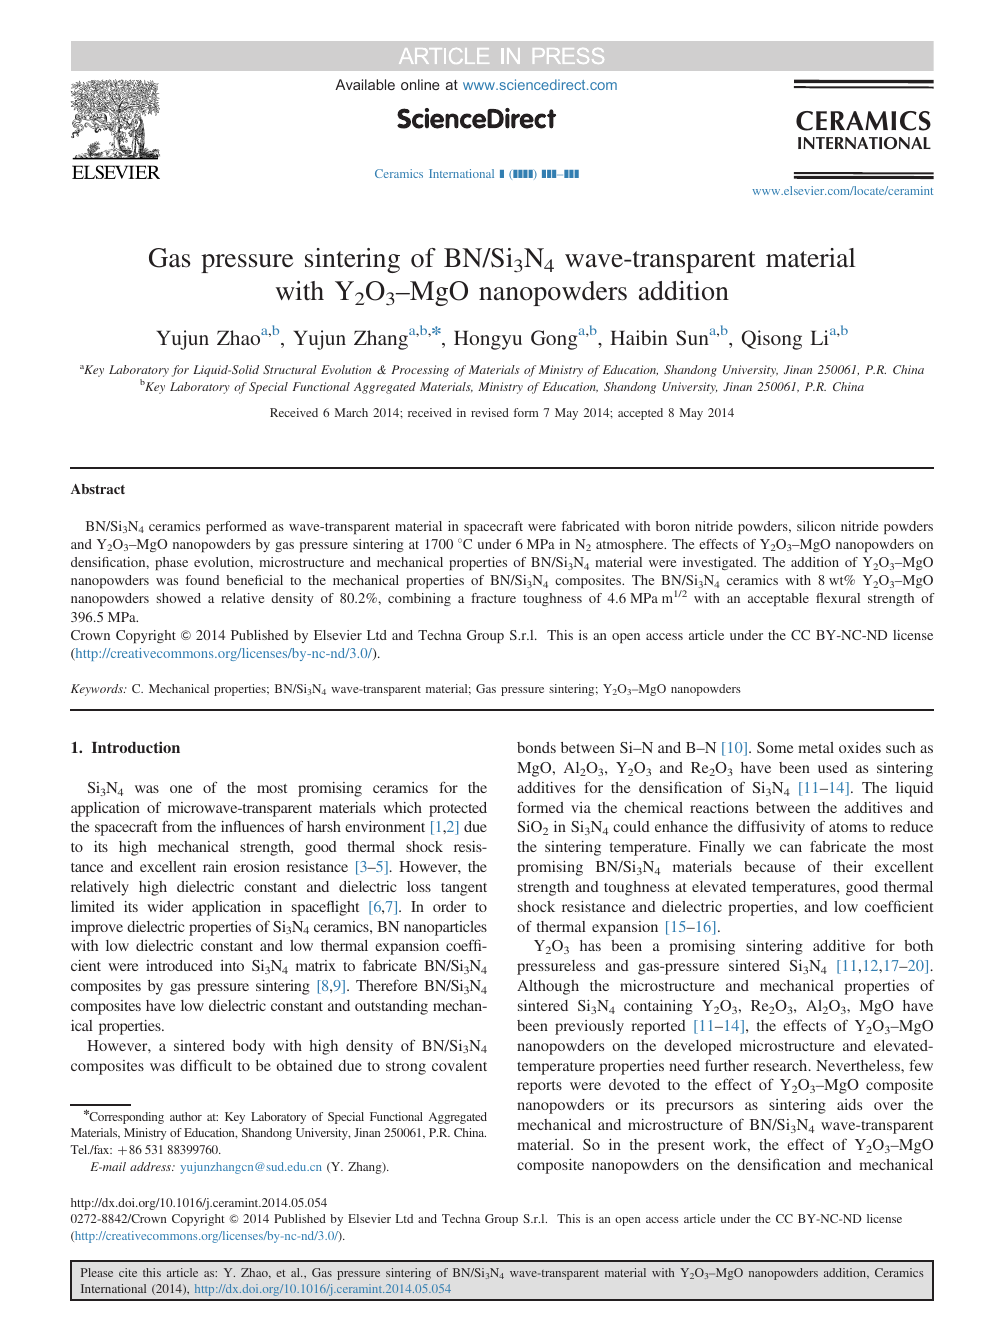 Gas Pressure Sintering Of Bn Si3n4 Wave Transparent Material With Y2o3 Mgo Nanopowders Addition Topic Of Research Paper In Materials Engineering Download Scholarly Article Pdf And Read For Free On Cyberleninka Open Science Hub